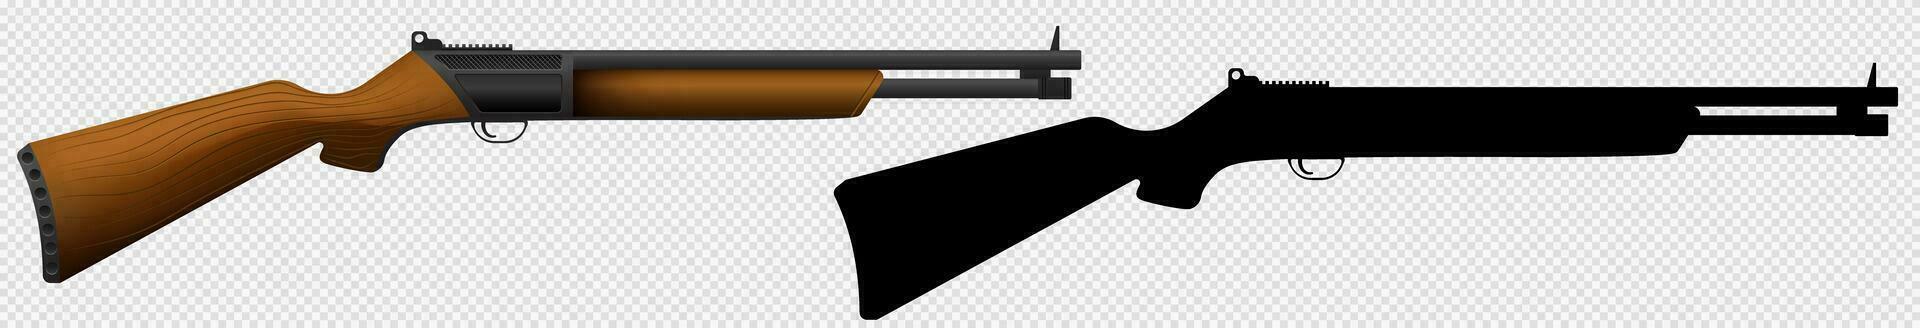 Pump shotgun. Rifle for military and hunting situations with large caliber ammunition and vector shot